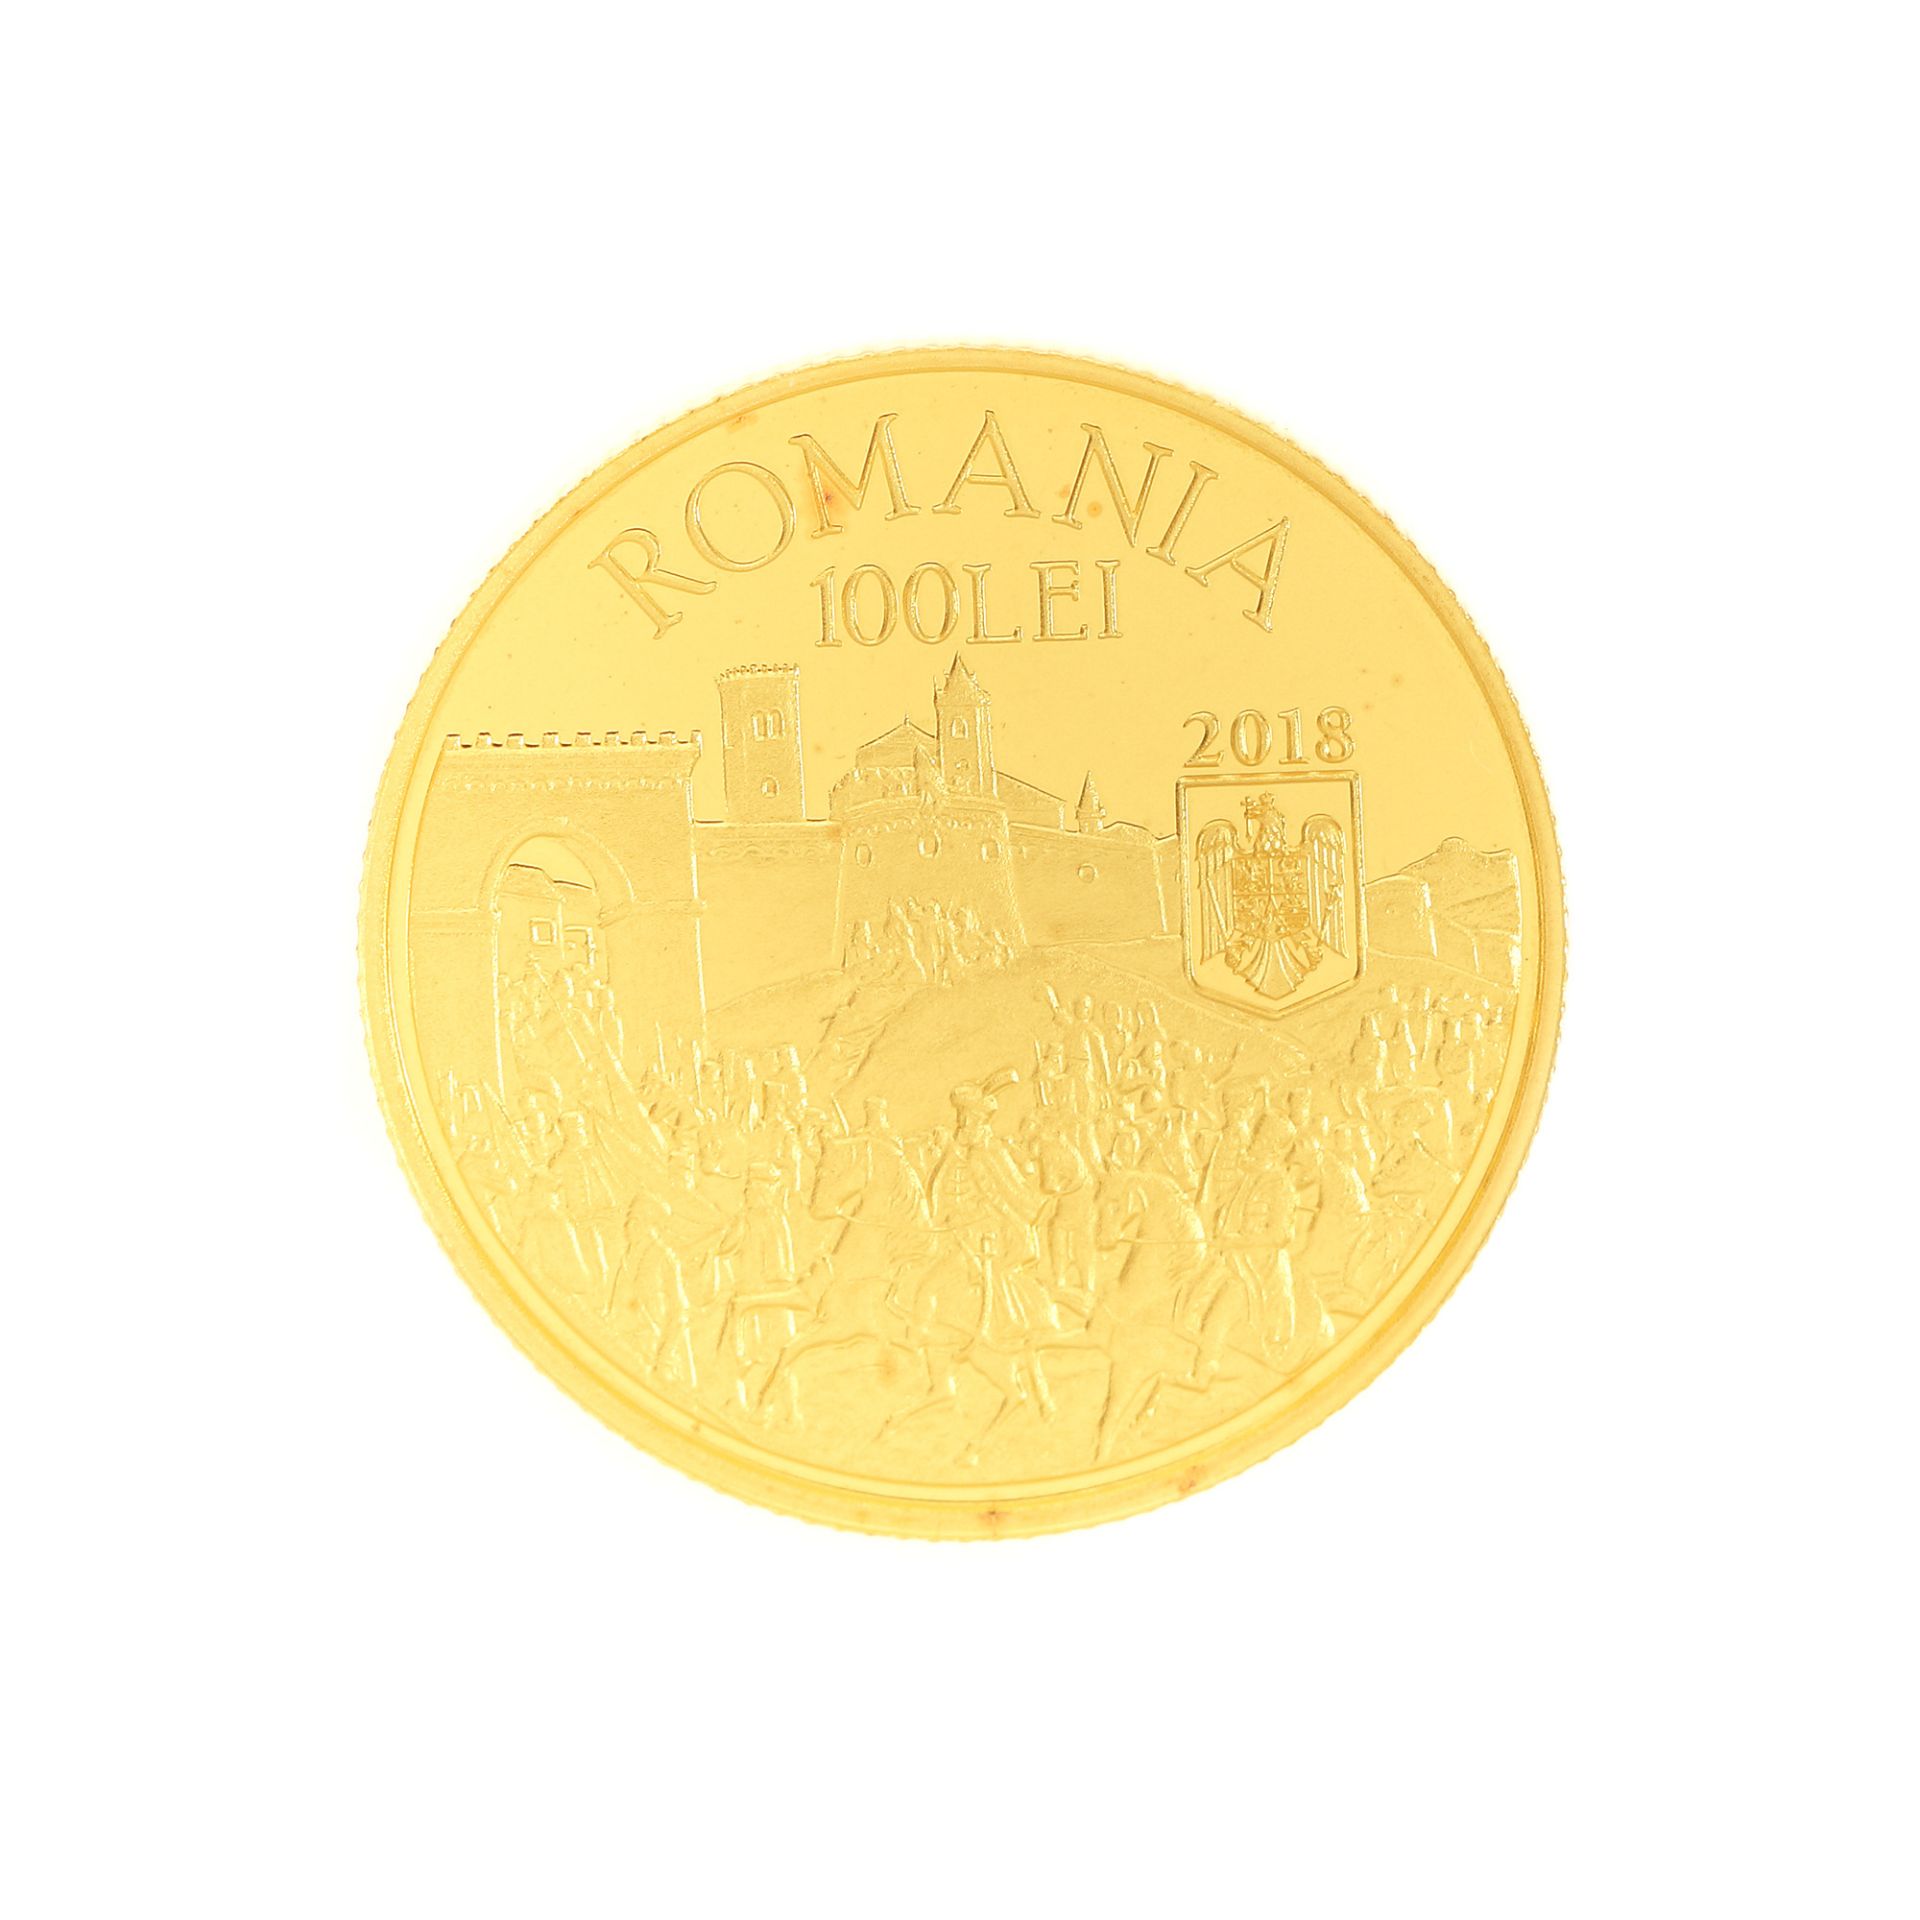 BNR commemorative coin, Michael the Brave, 2018, gold - Image 2 of 2